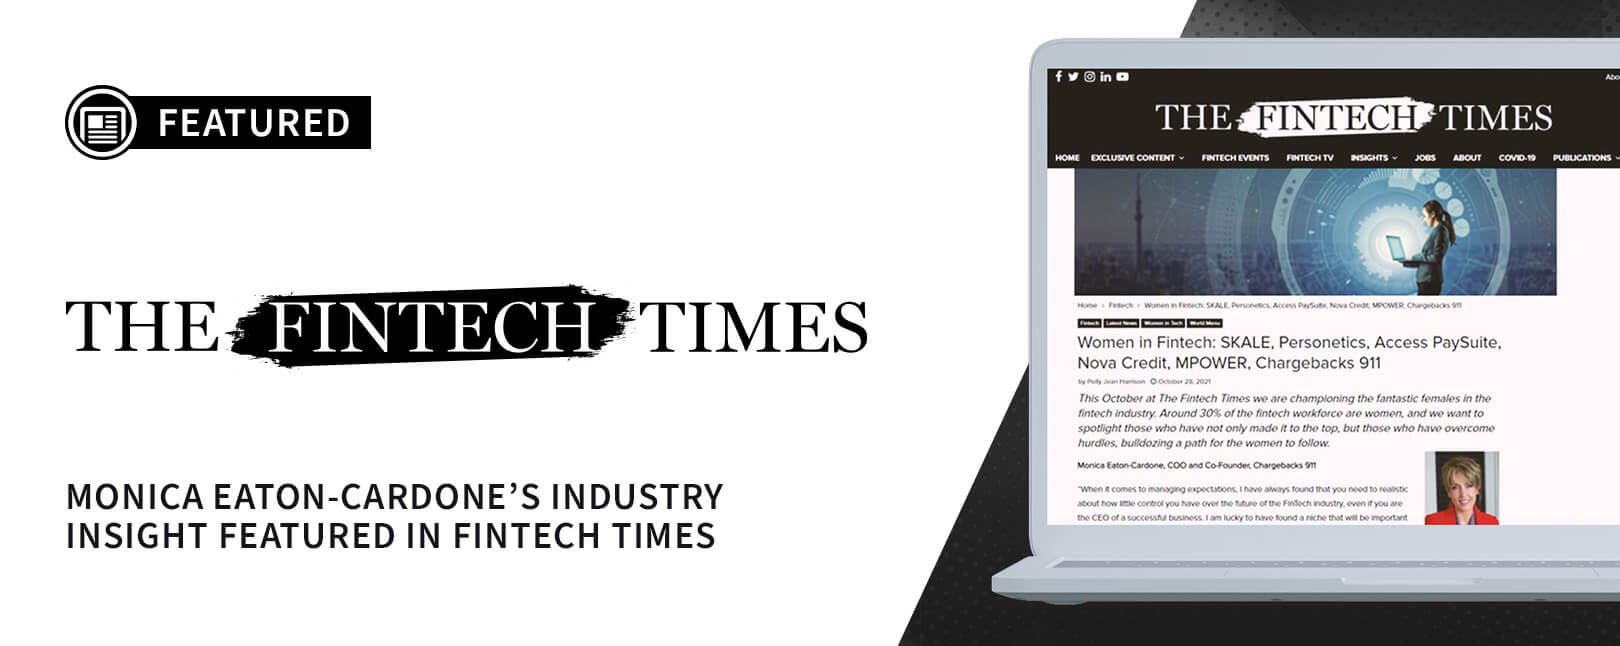 Monica Eaton-Cardone's Industry Insight Featured in Fintech Times